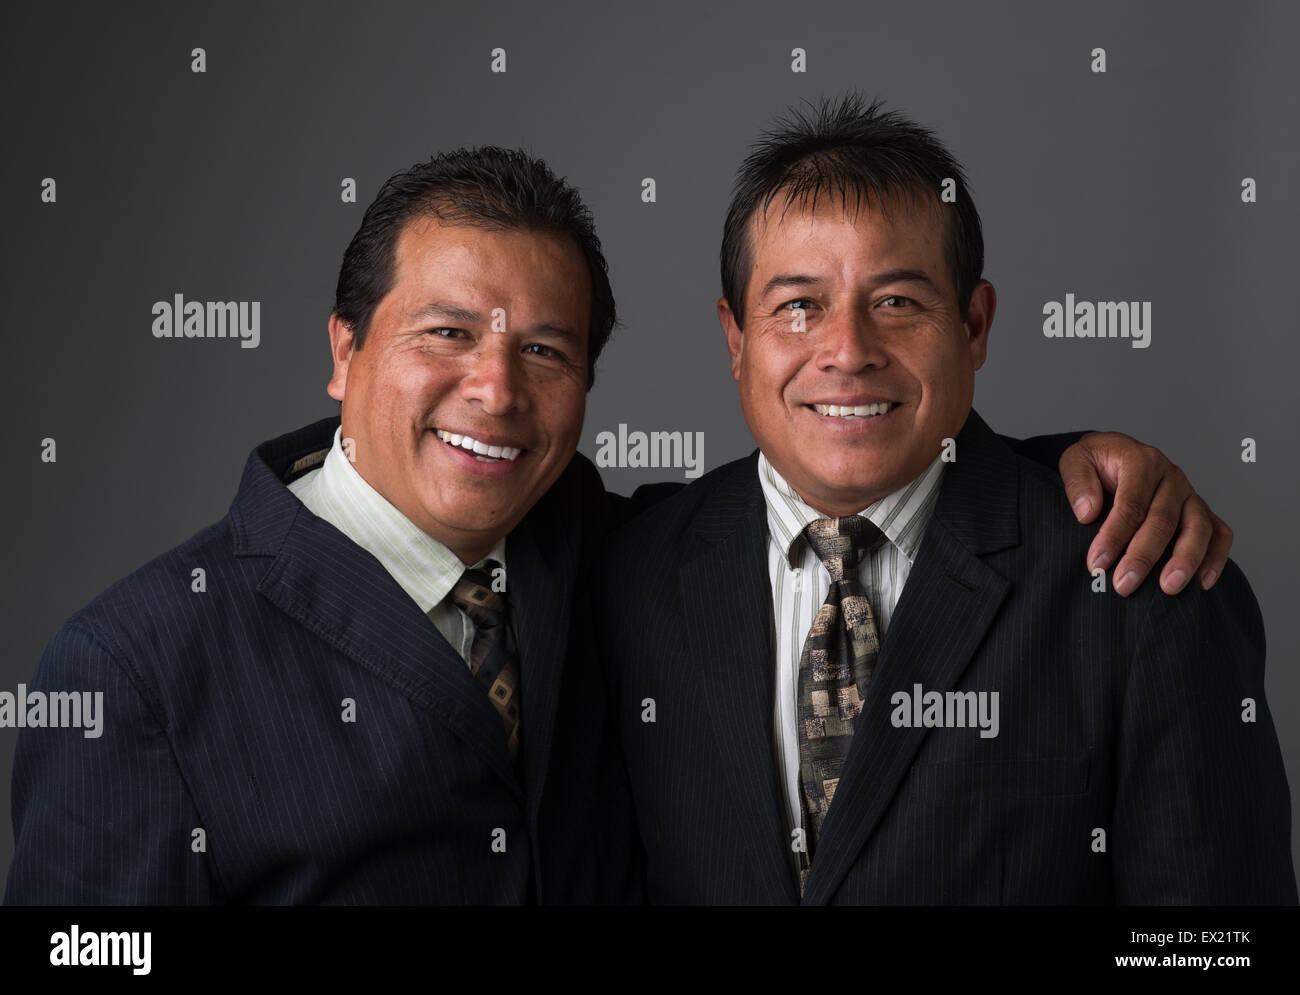 Hispanic business men  smiling in business suit and neckties posing for a portrait Stock Photo